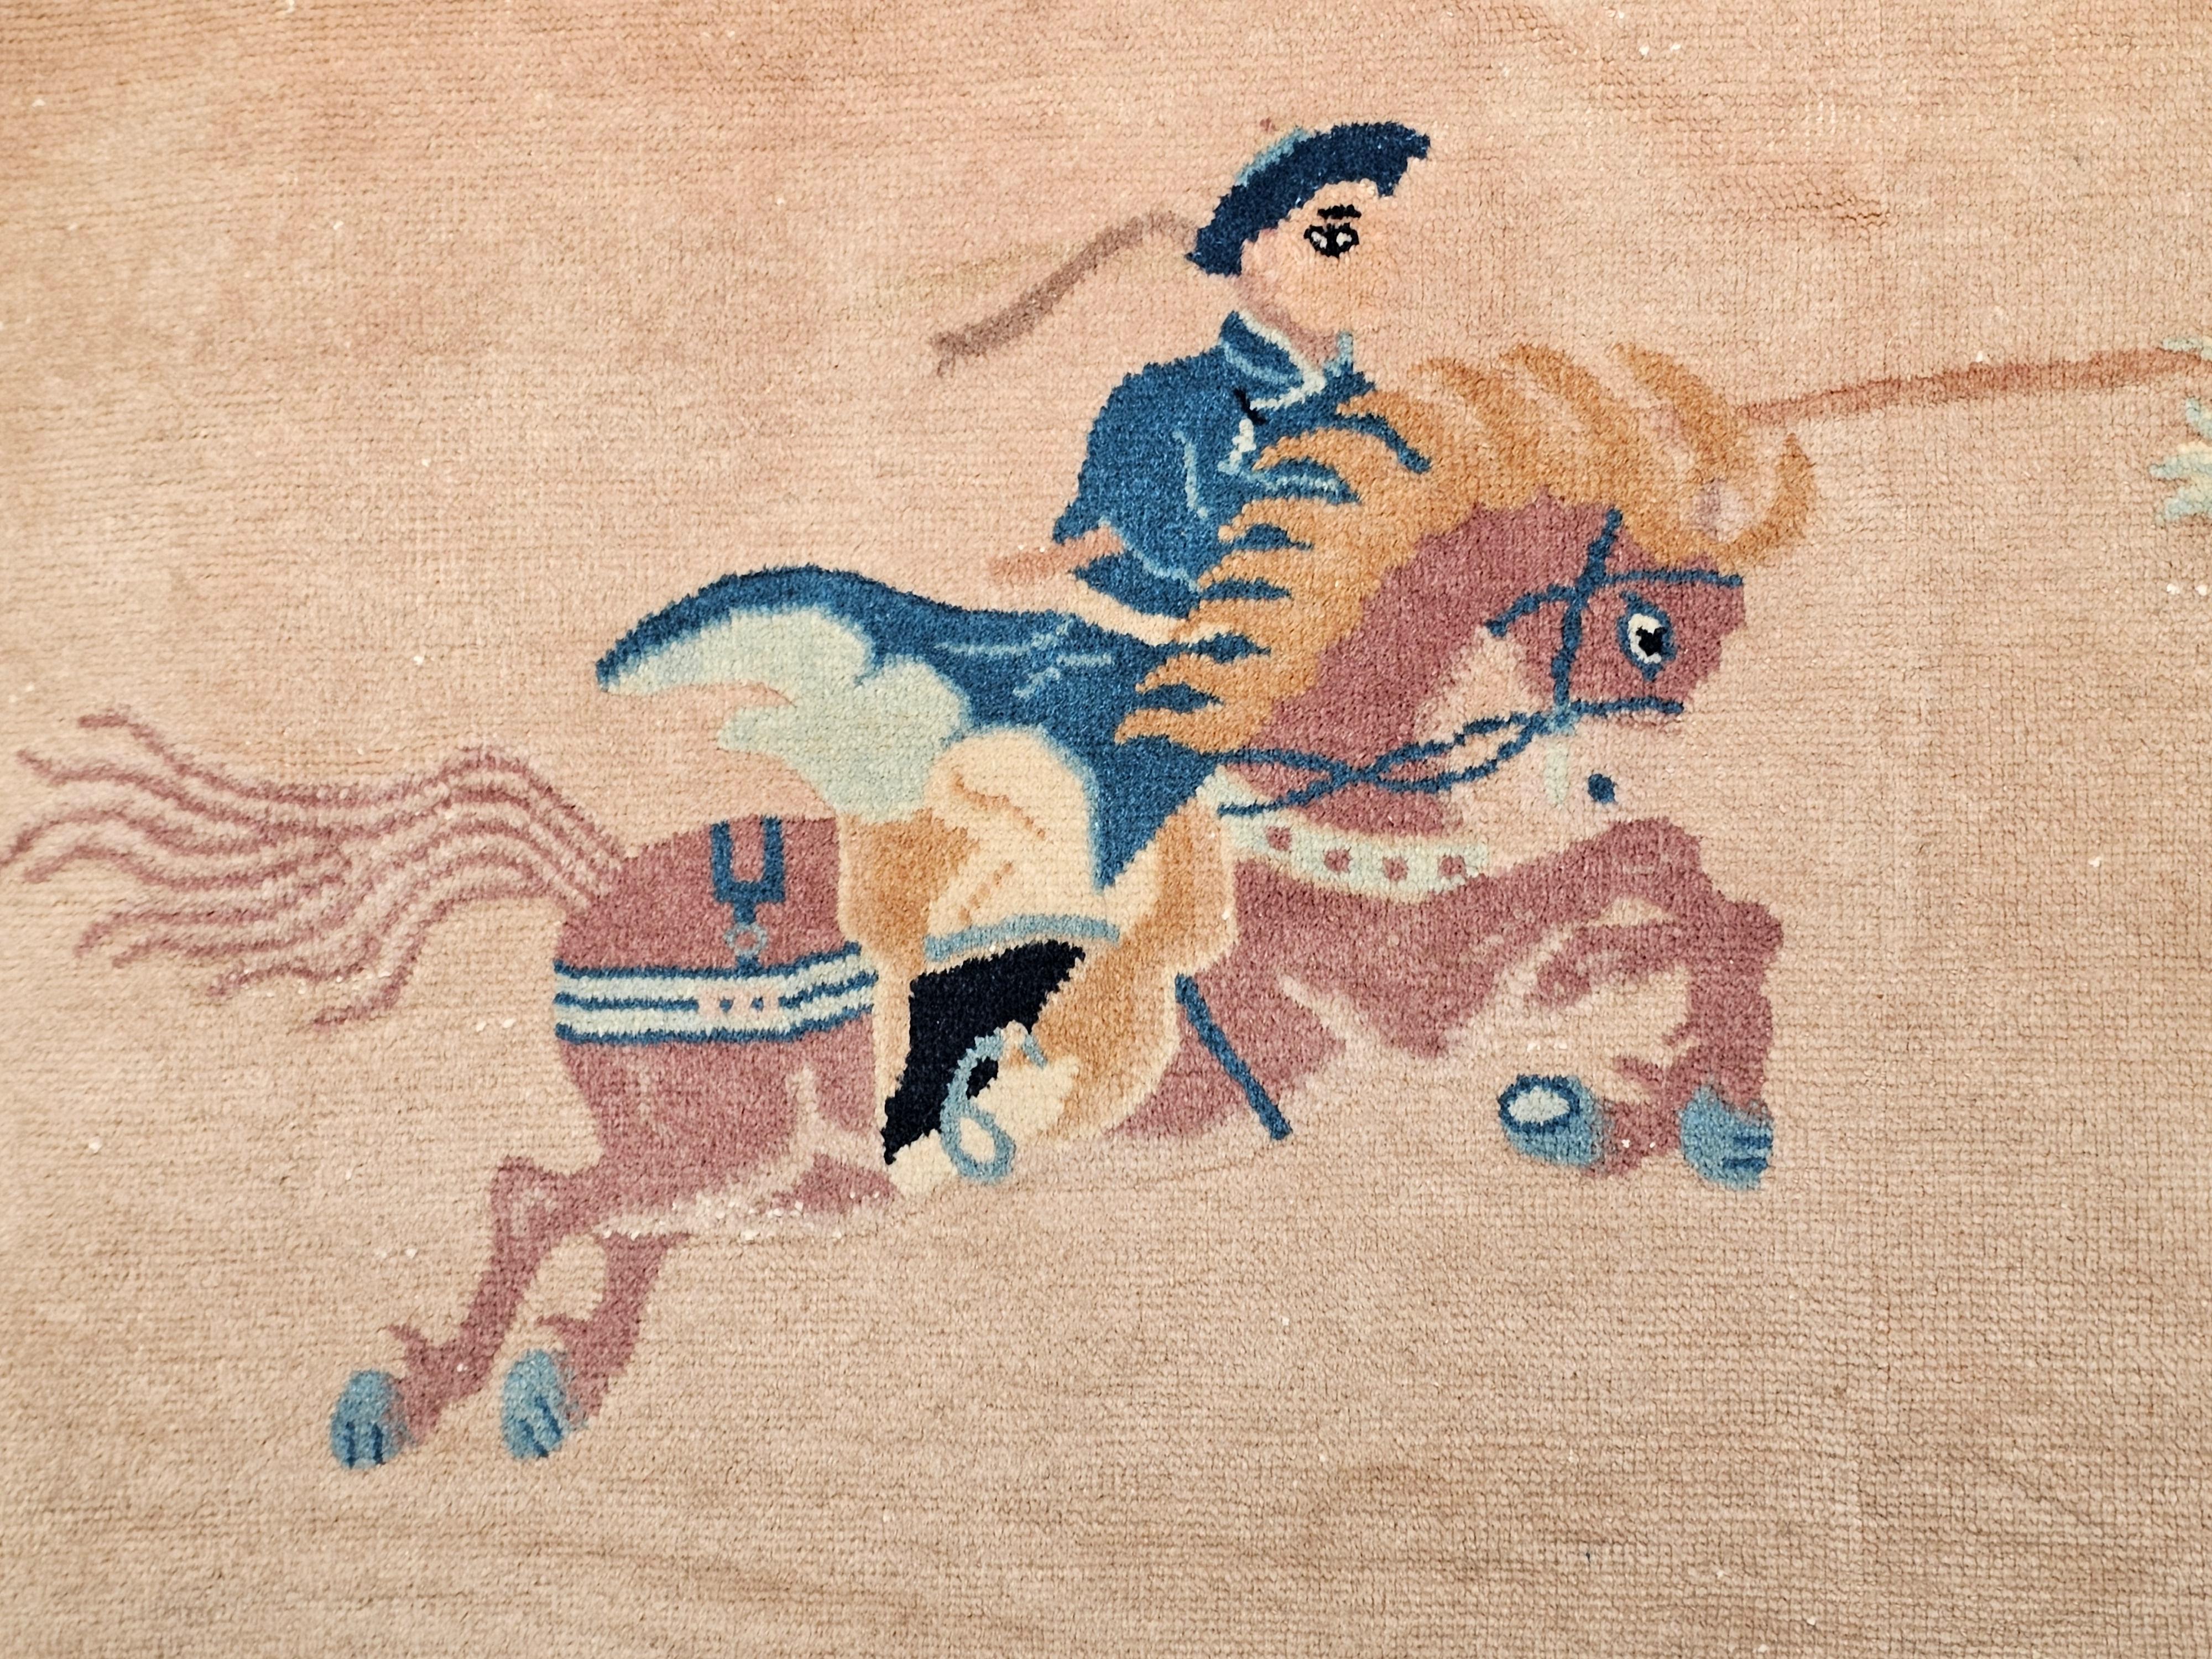 Vintage Chinese Pictorial Rug of a Riding Horseman in Pale Peach/Pink, Baby Blue In Good Condition For Sale In Barrington, IL